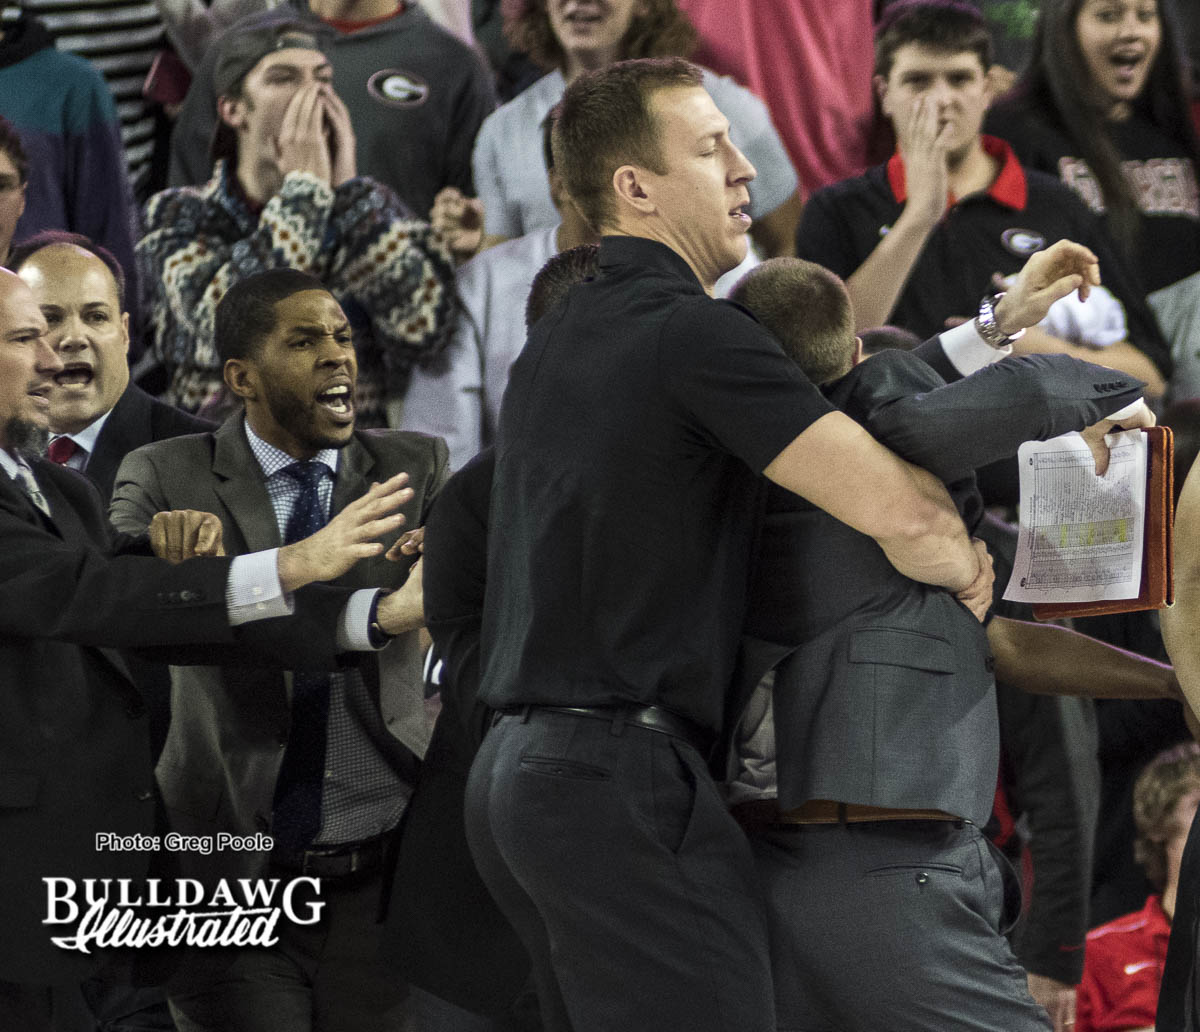 A Missouri assistant coach is restrained during the scuffle at the end of the first half of the UGA/Missouri game January 7, 2017